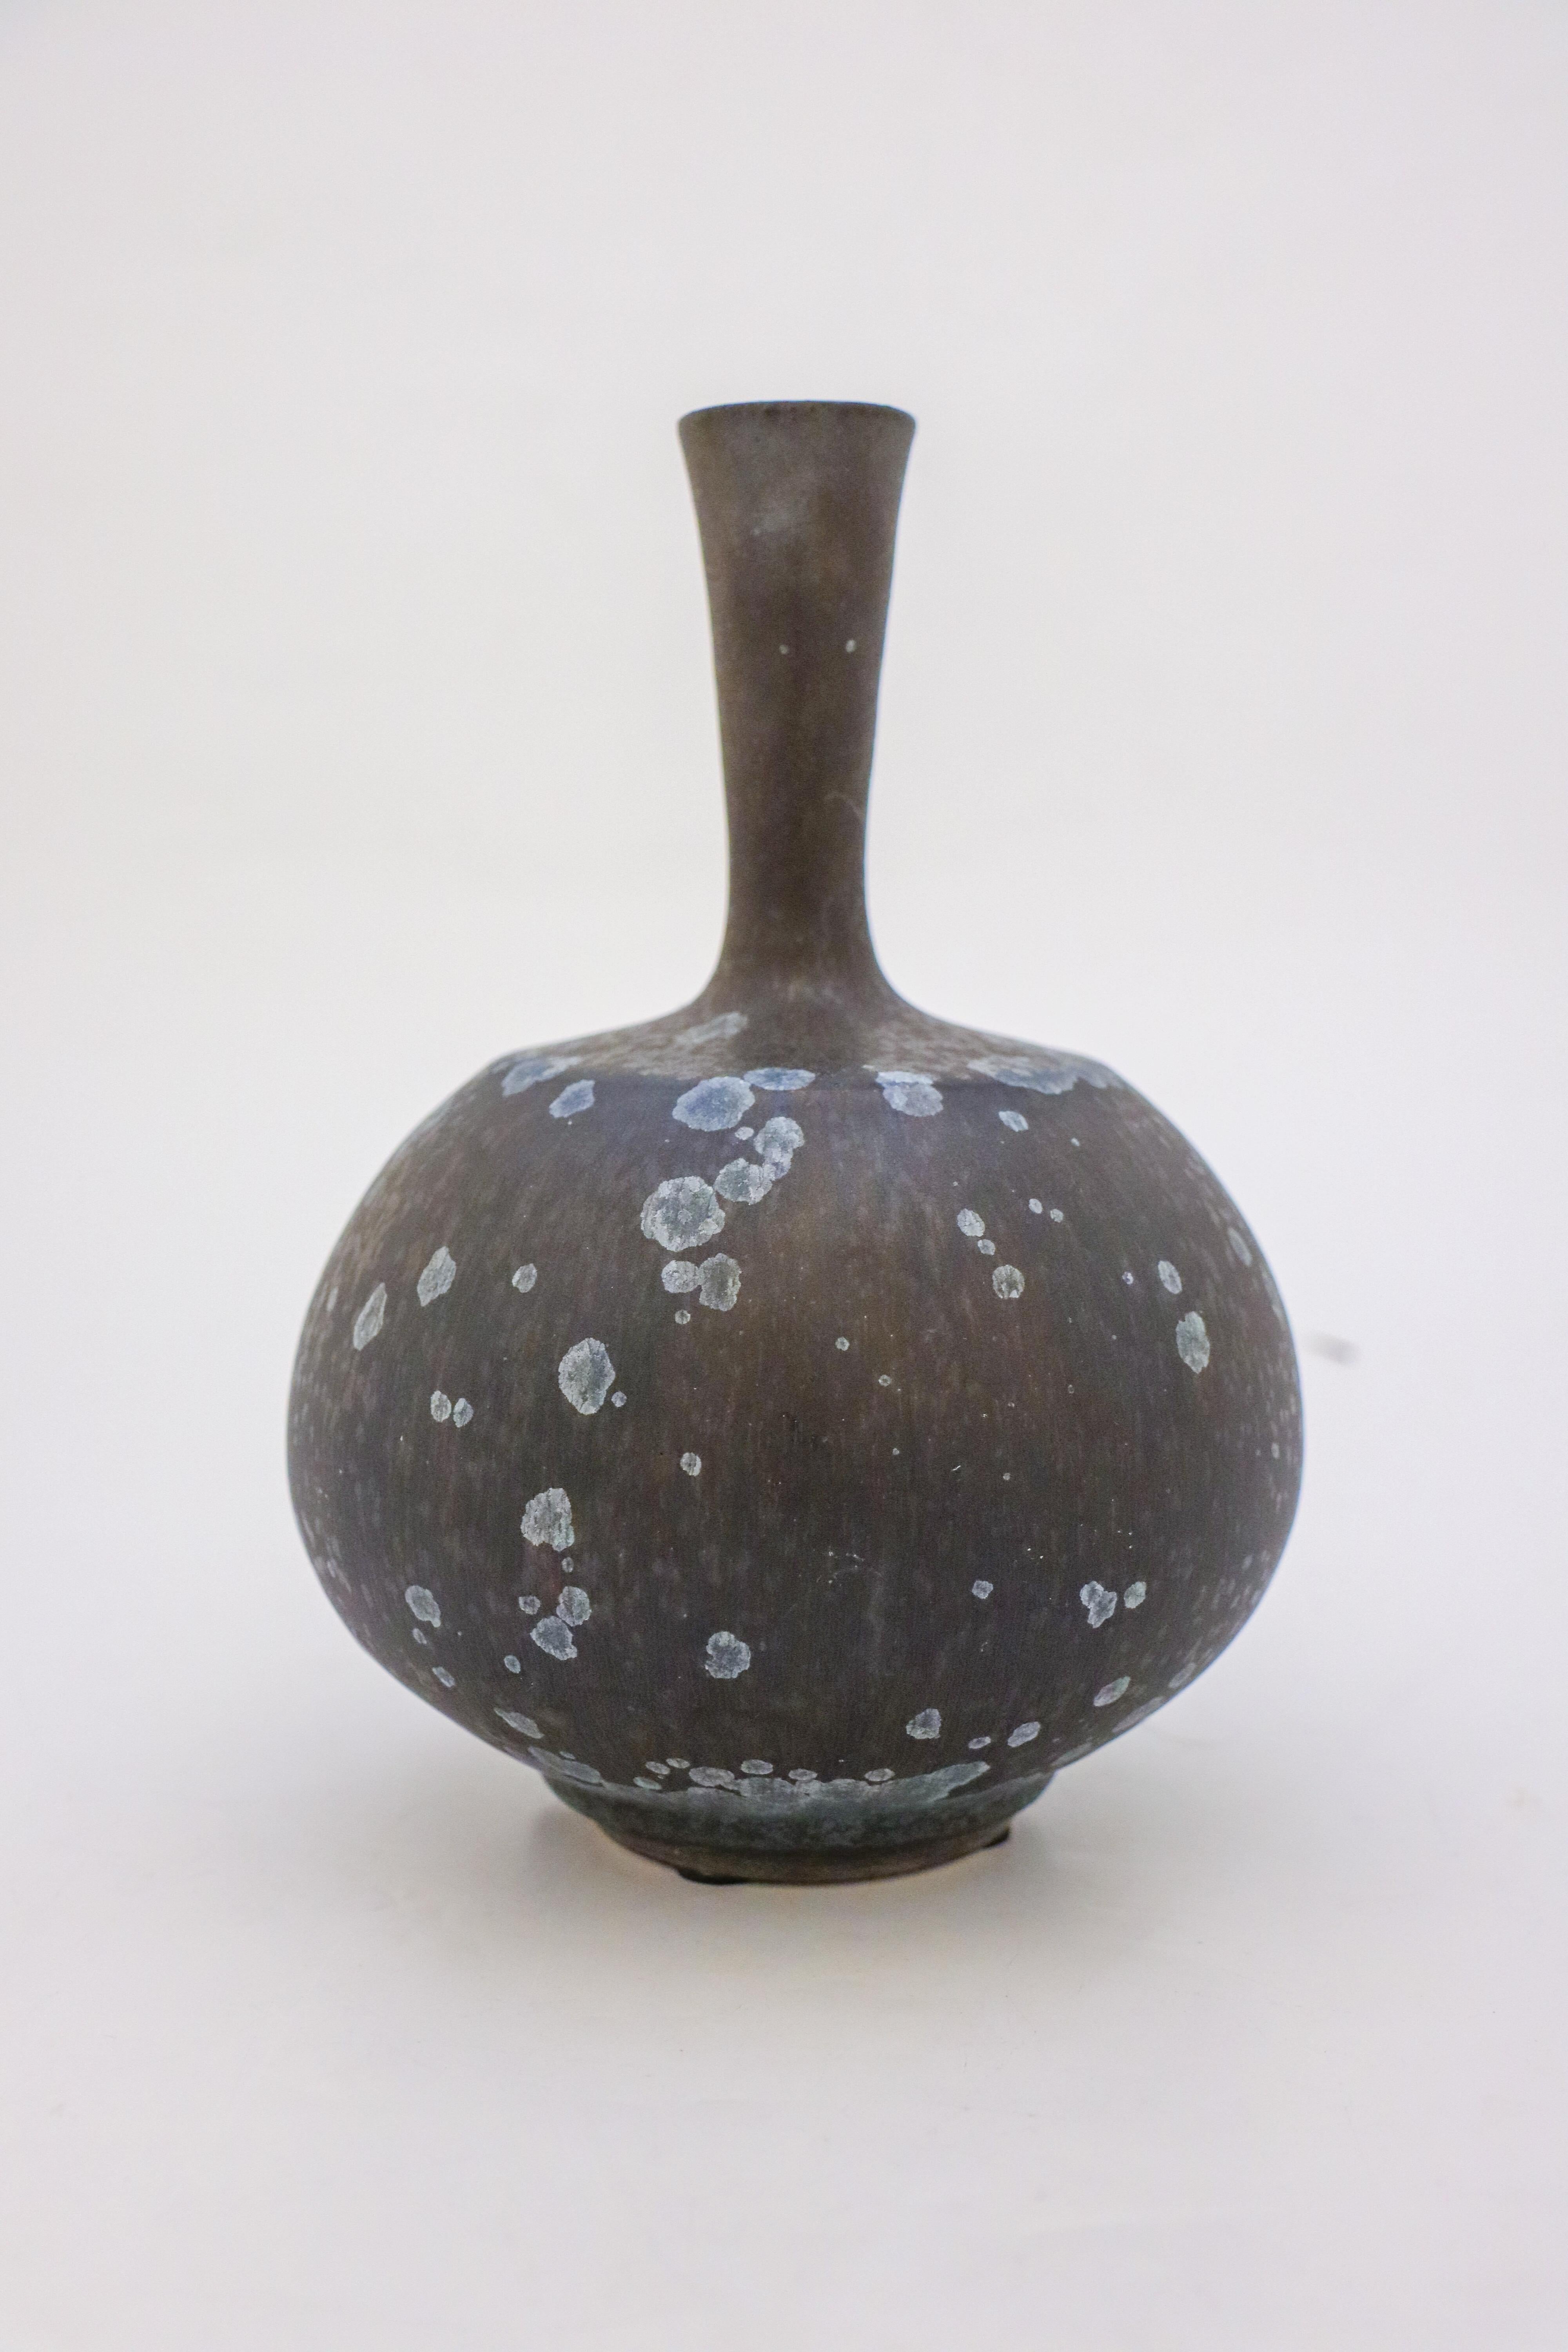 A unique vase in a black and dark blue color with a lovely crystalline glaze created by the contemporary Swedish artist Isak Isaksson in his own studio. The vase is 20.5 cm (8.2